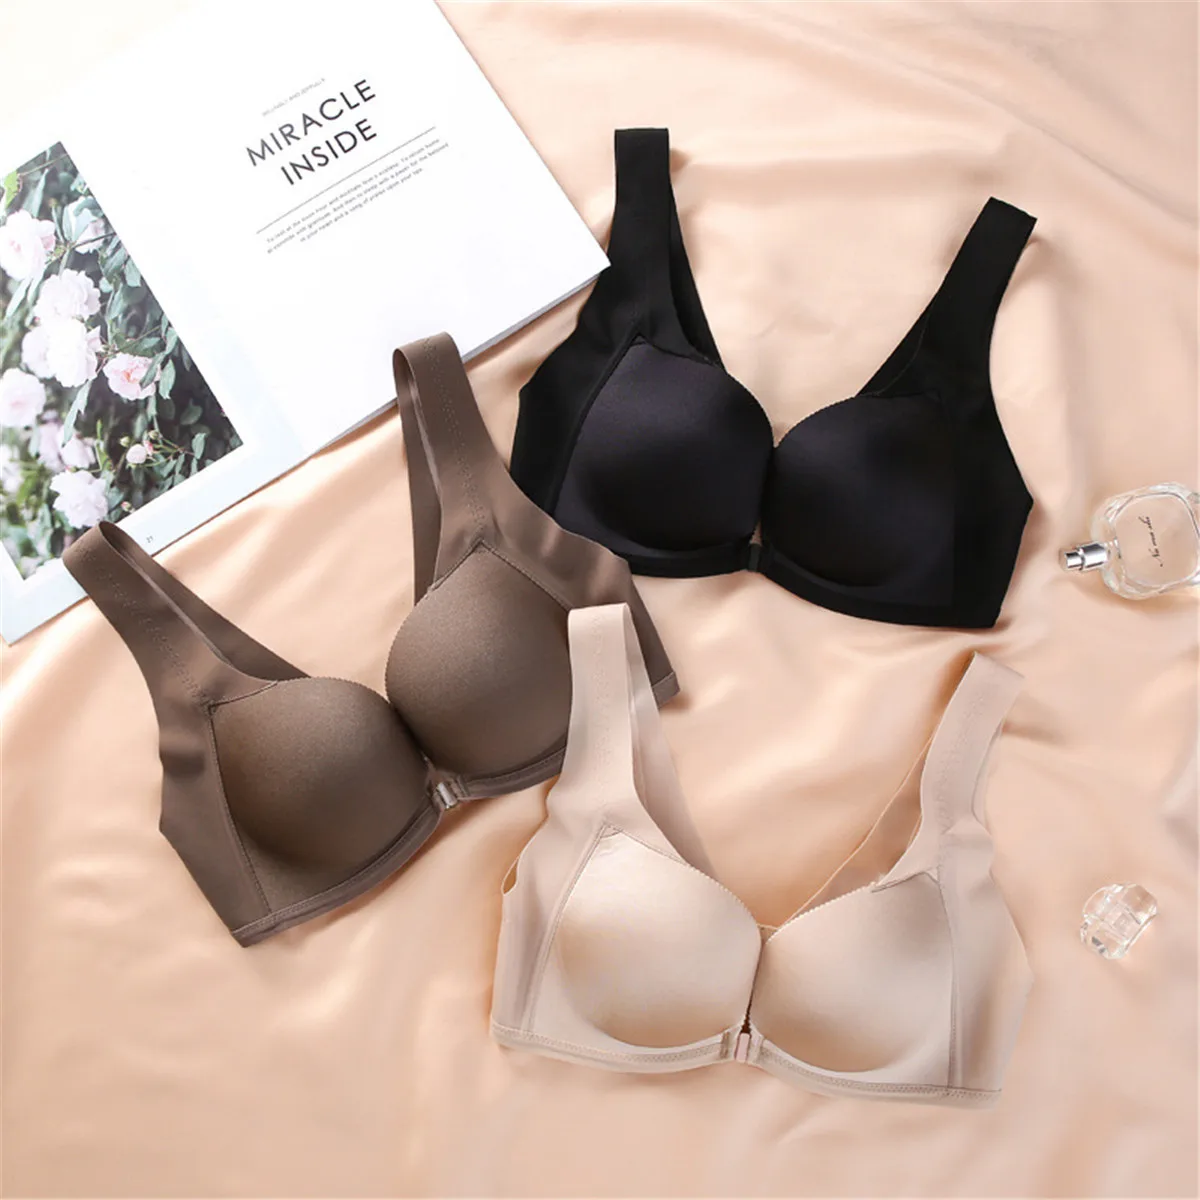 

A/B Cup Women Seamless Bra Sexy Underwear Bralette Push Up Bra Female Brassiere Intimate Lingerie Solid Color Wirefree Bras